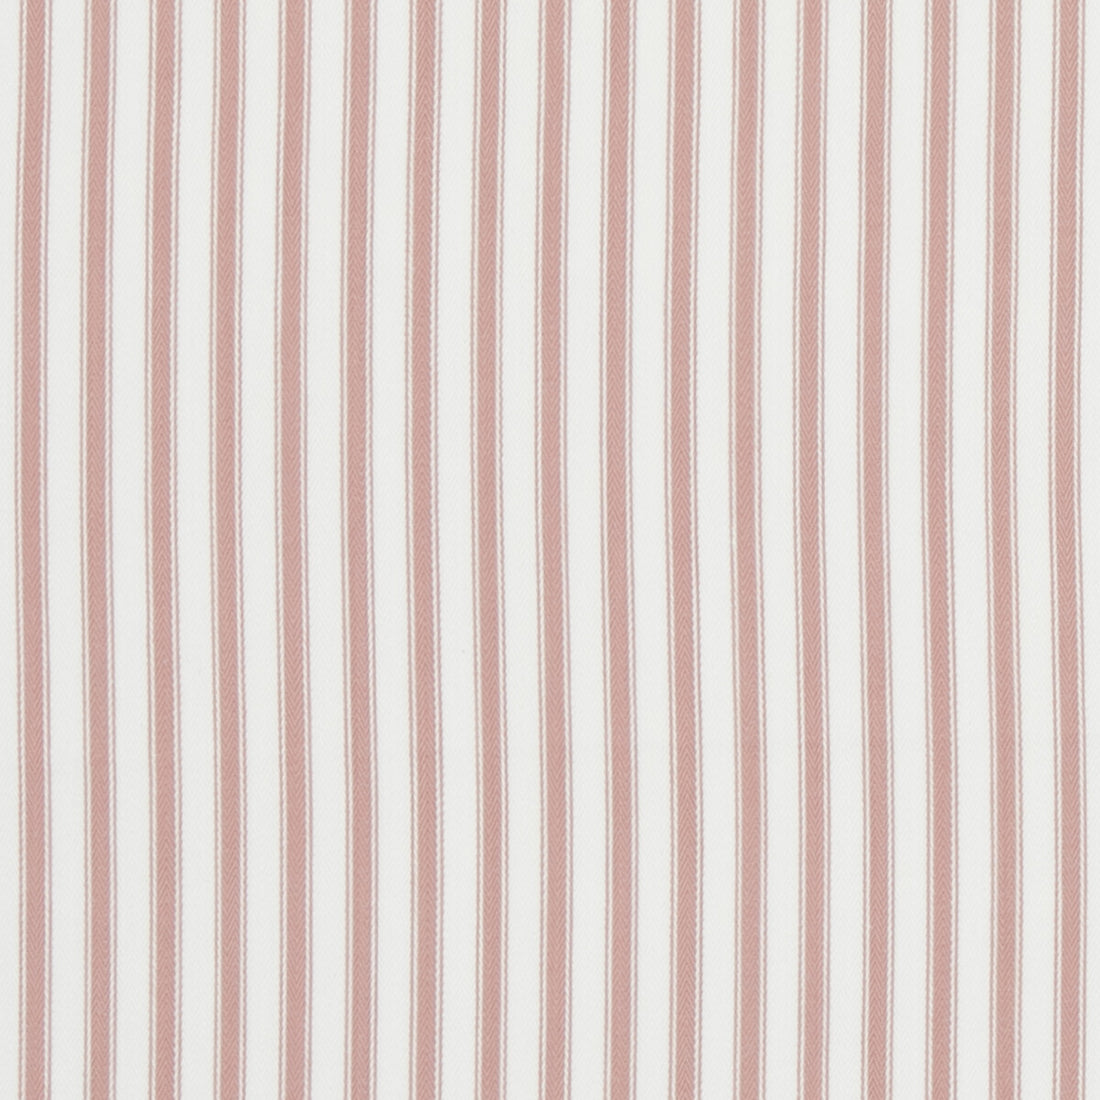 Sherborne Ticking fabric in pink color - pattern PF50505.404.0 - by Baker Lifestyle in the Bridport collection